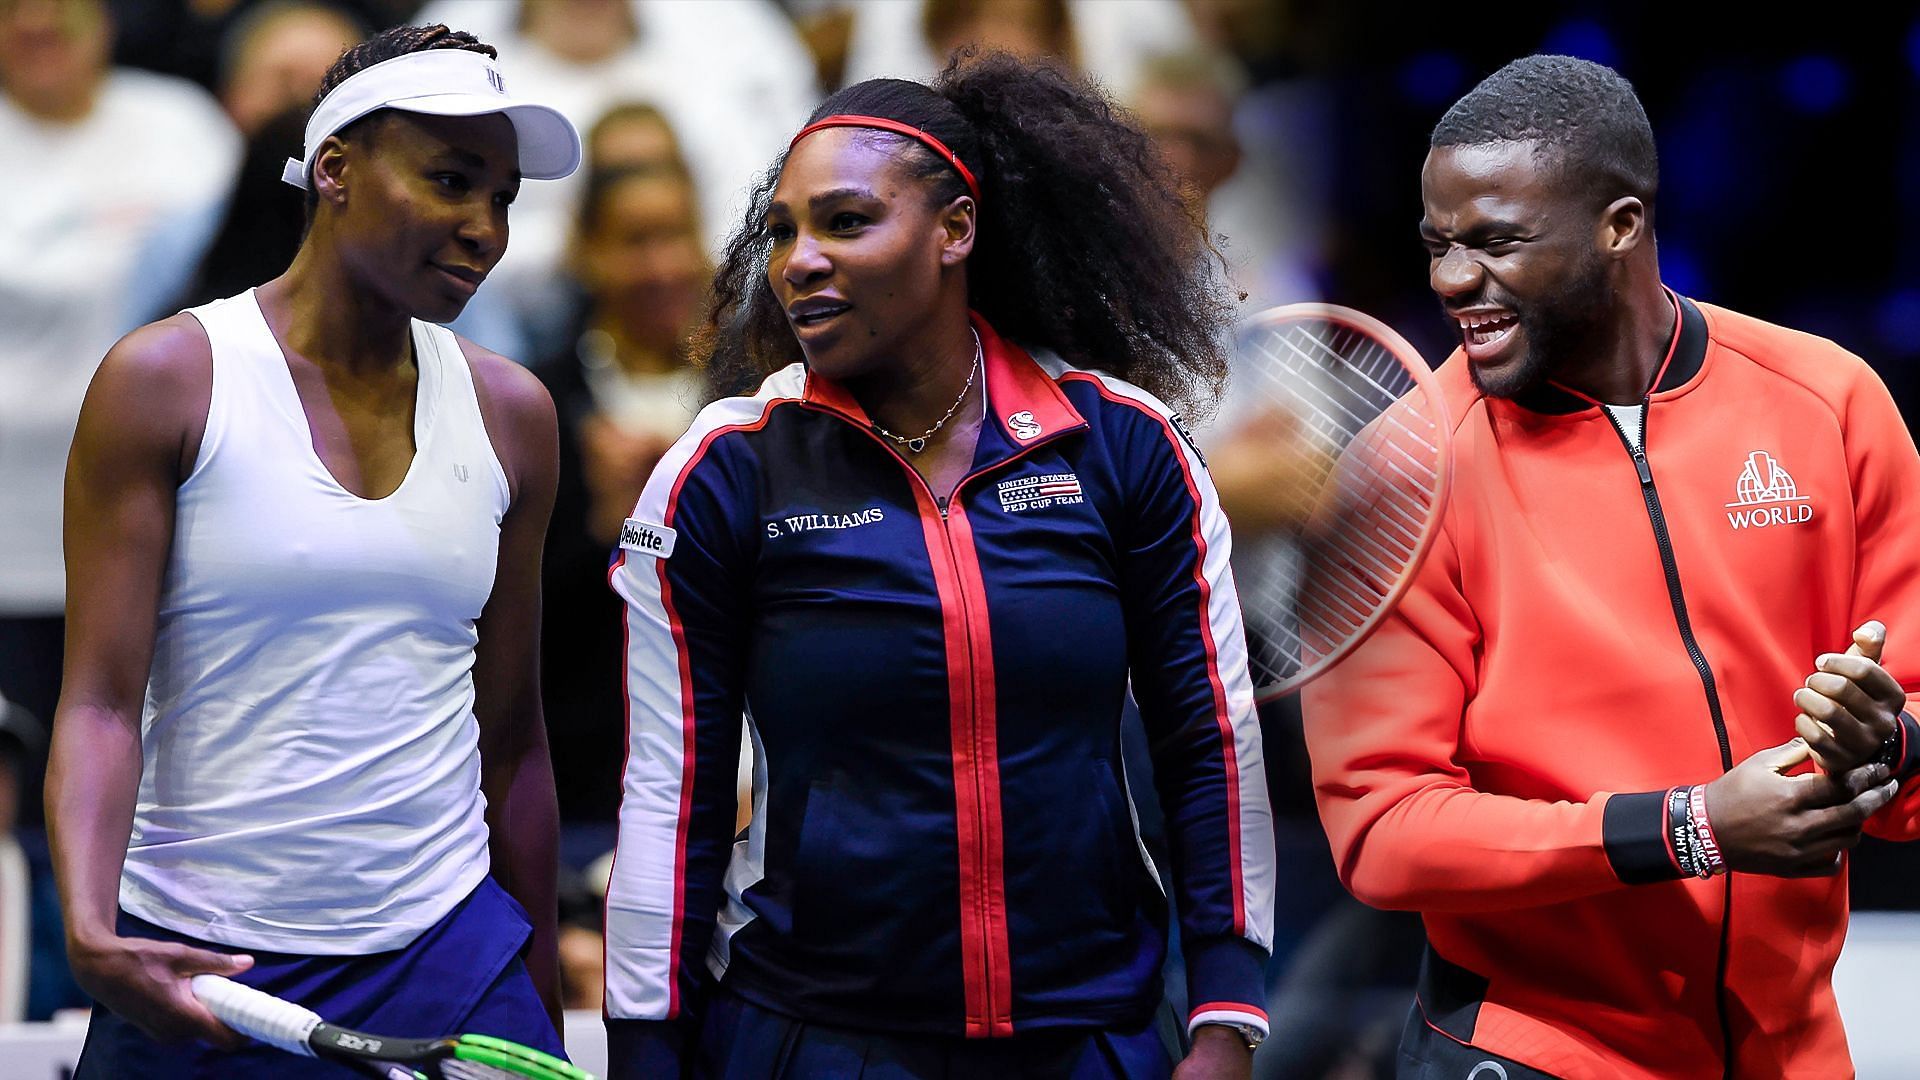 From Left to Right : Venus Williams, Serena Williams and Frances Tiafoe